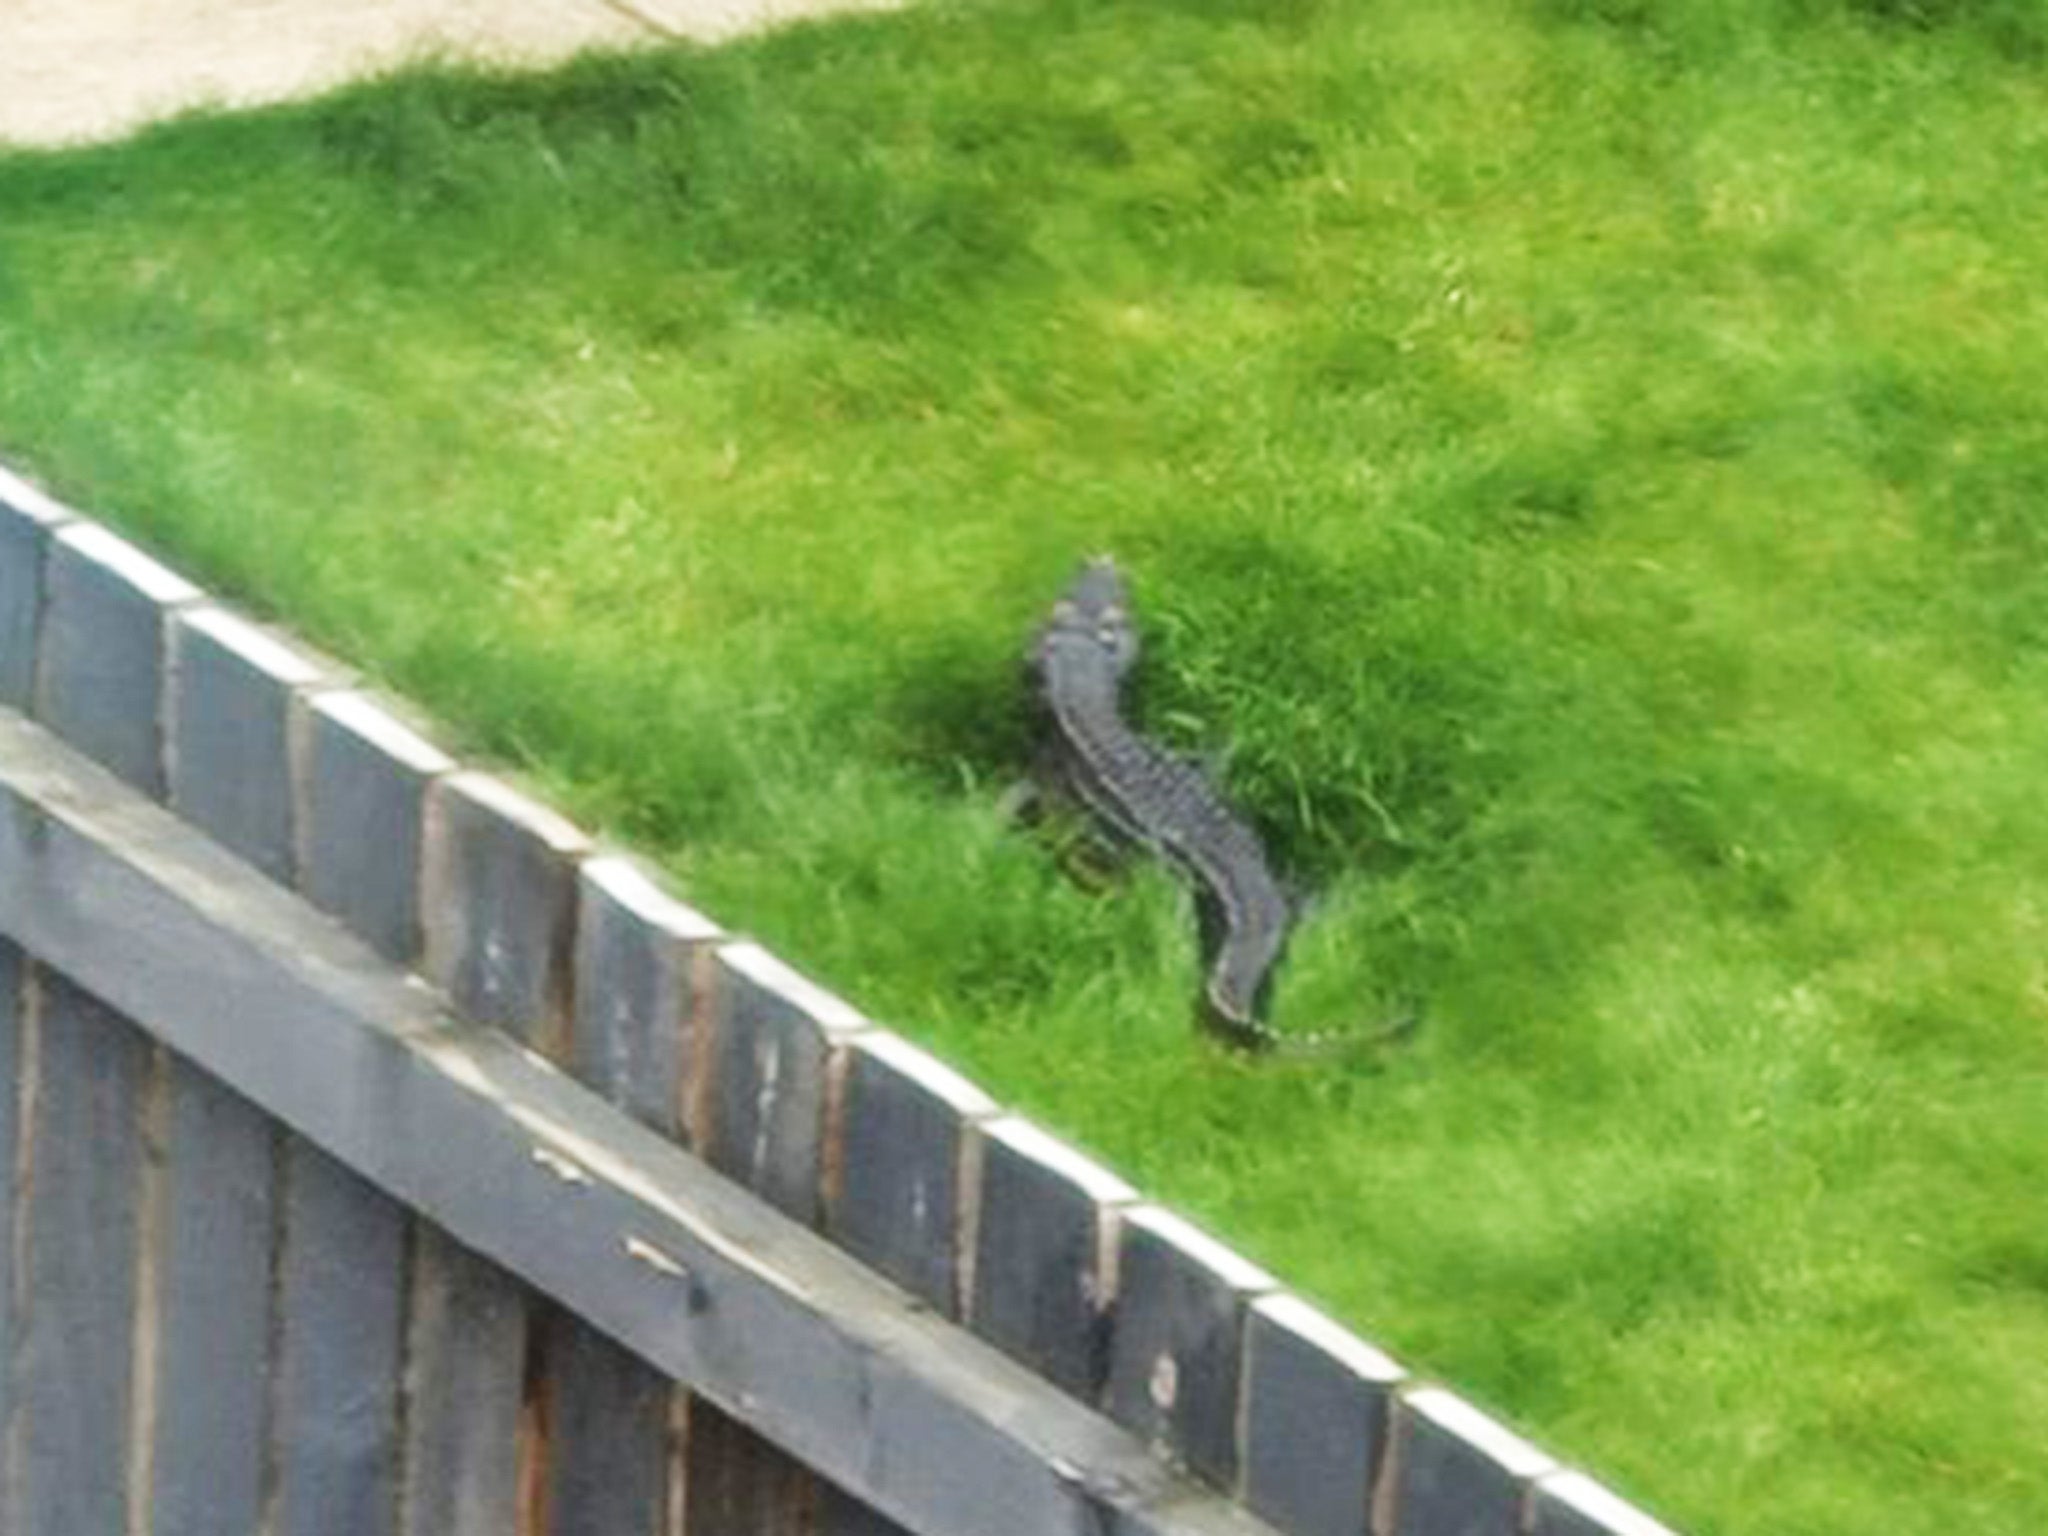 Reptile reportedly seen by the River Aire